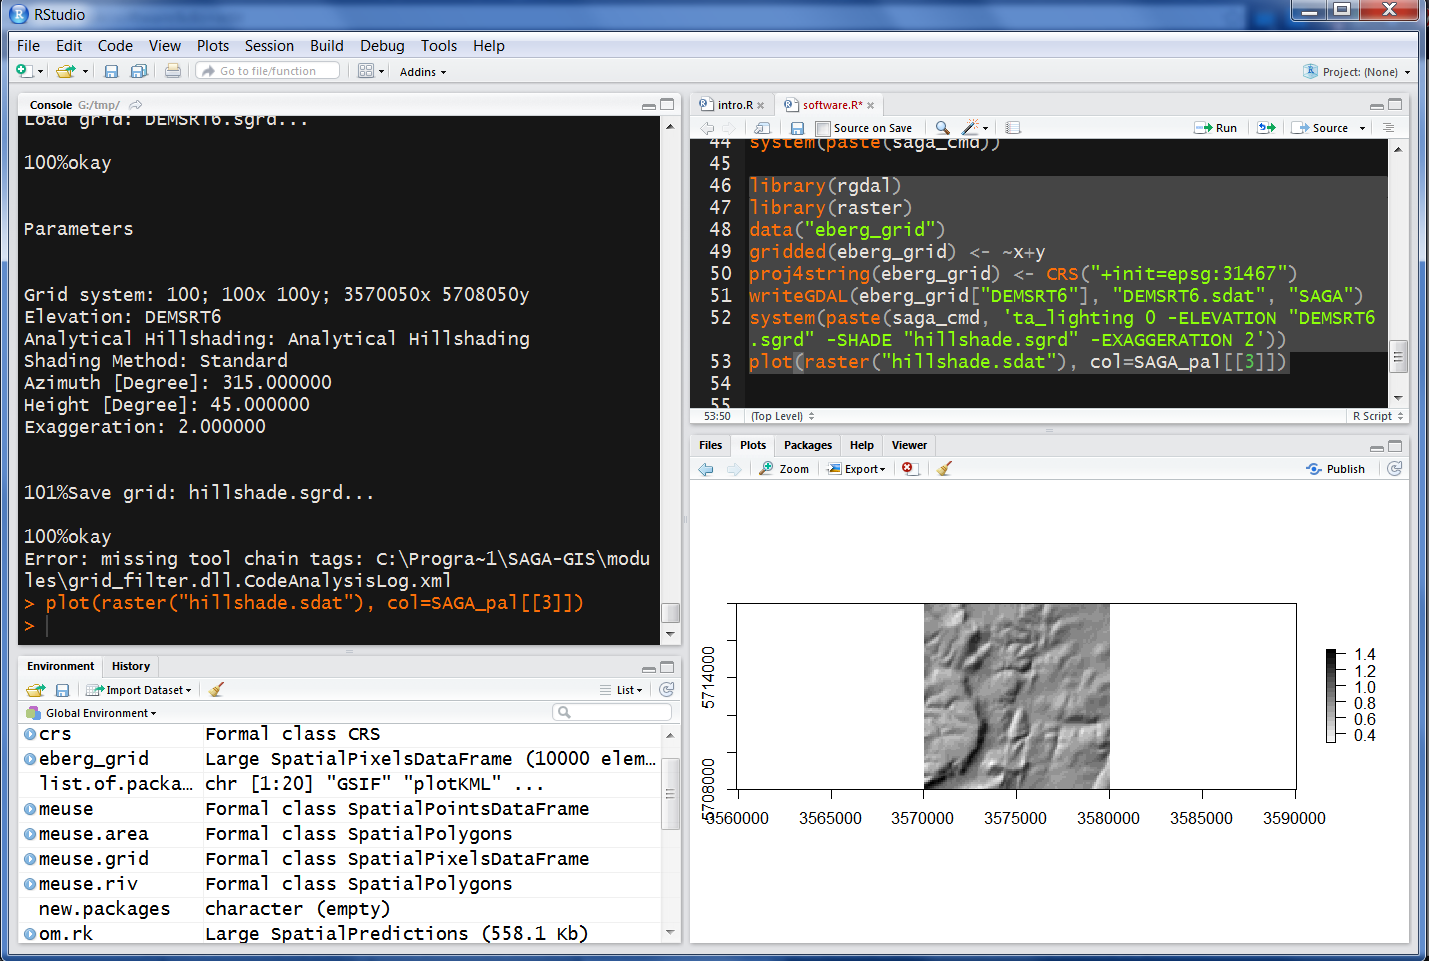 Deriving hillshading using SAGA GIS and then visualizing the result in R.